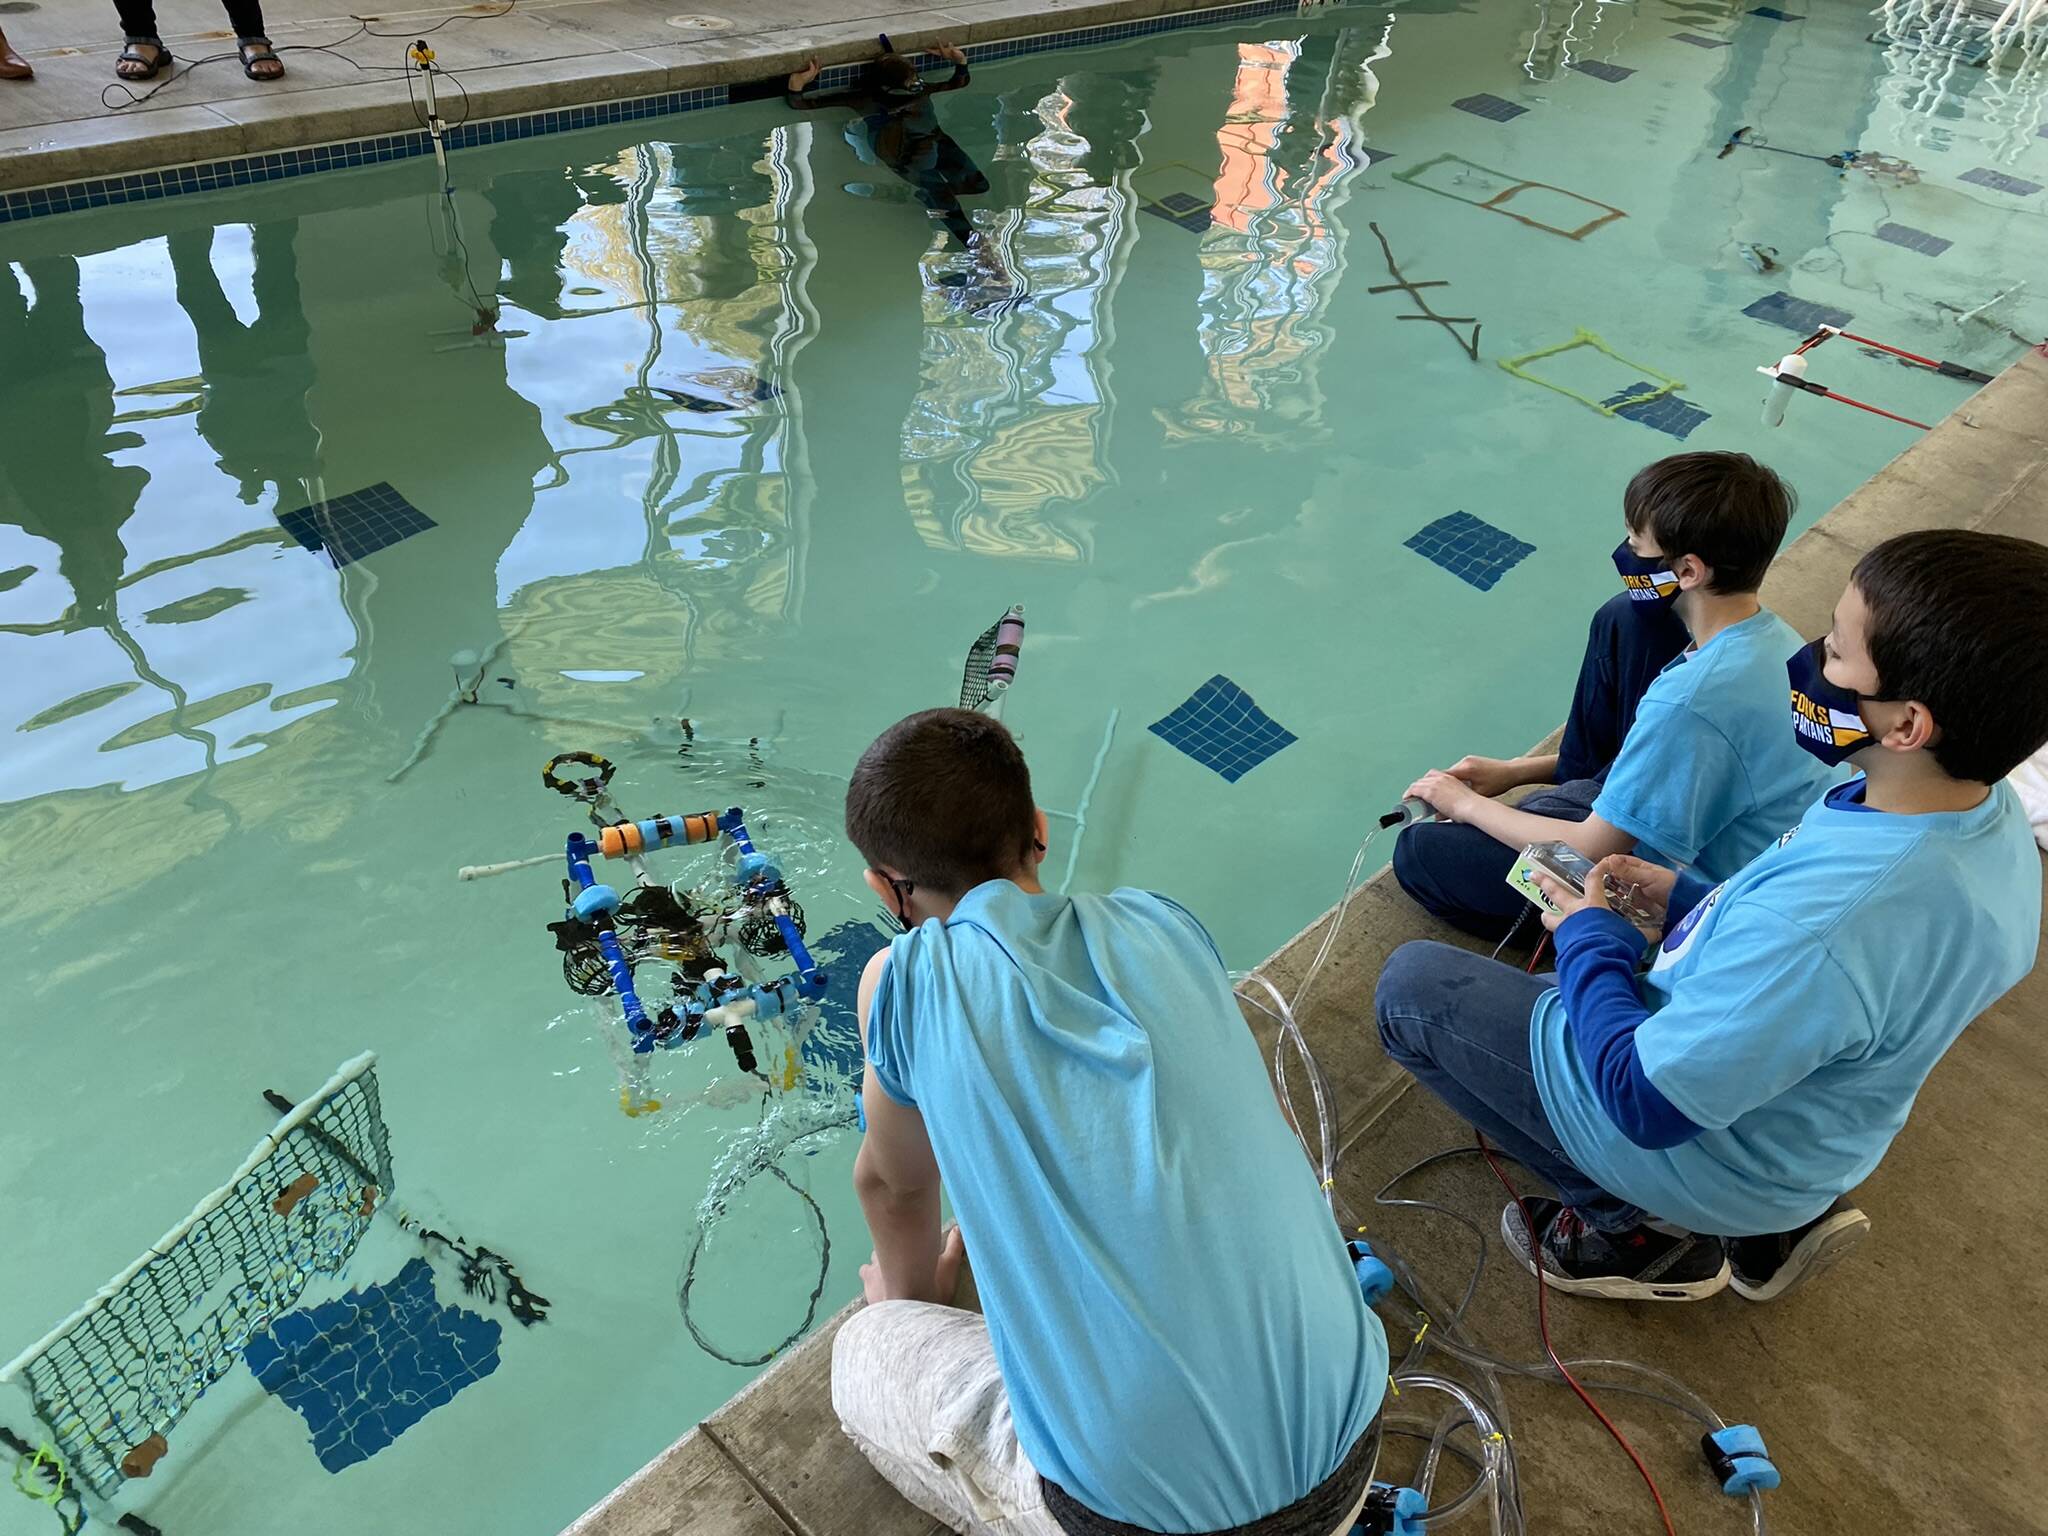 The first local Olympic Coast MATE ROV competition was held at the FAAC in May 2017 featuring 13 teams. It was sidelined for a time by COVID and returned this year with 10 teams competing.